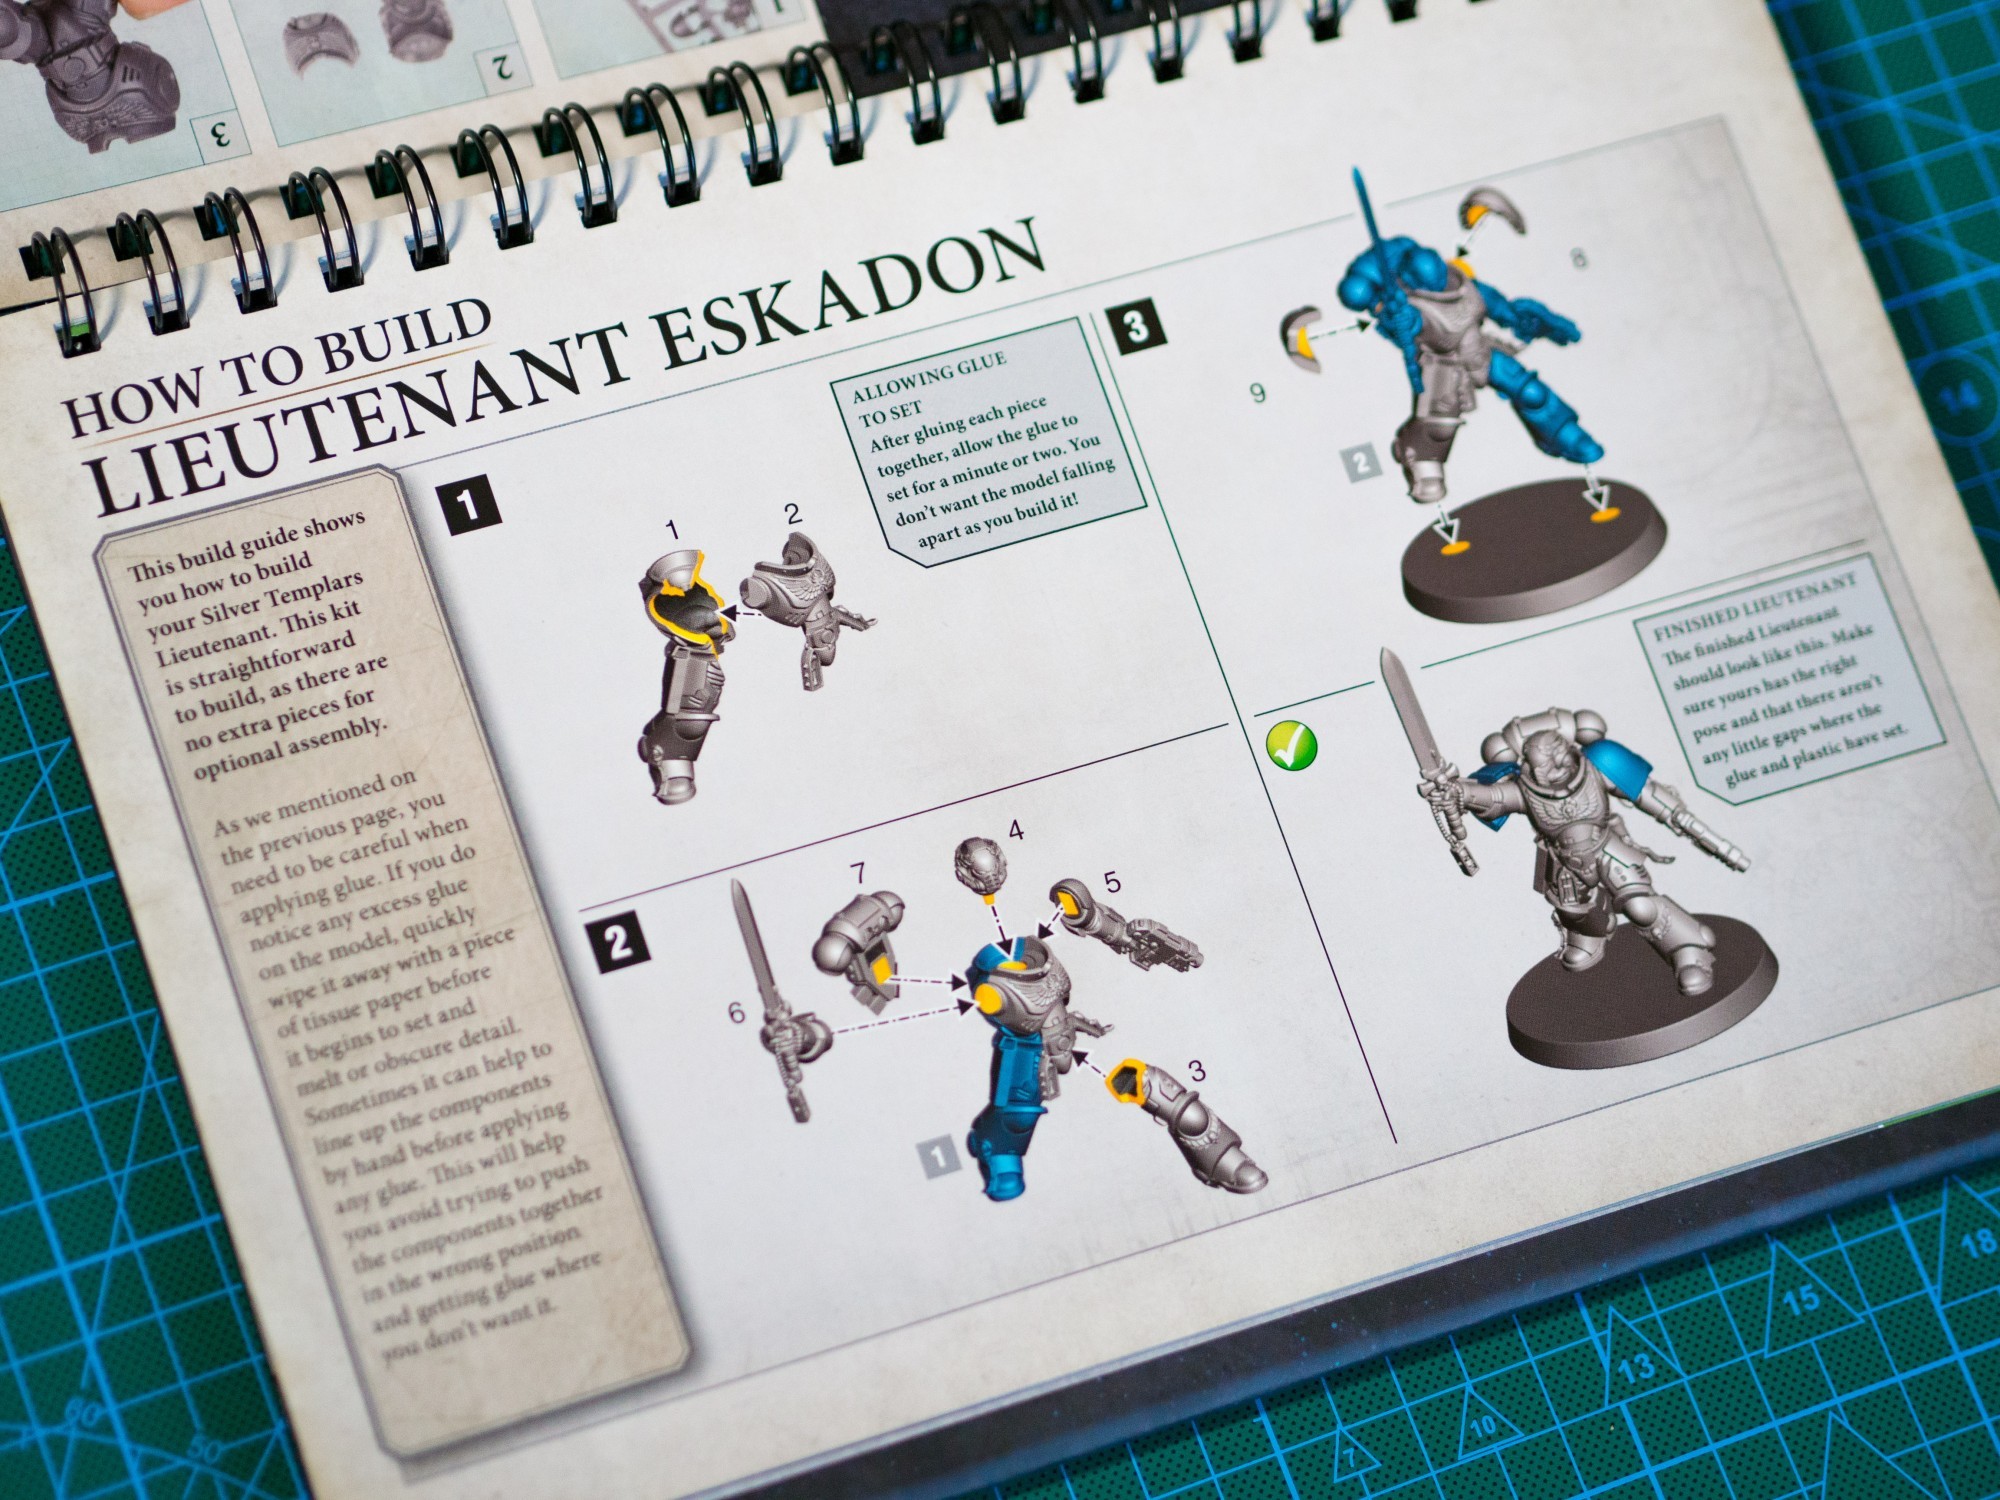 A rare set for Warhammer 40,000 Conquest. And who are the Silver Templars? - My, Warhammer 40k, Collection, Space Marine, Adeptus Astartes, Partywork, Longpost